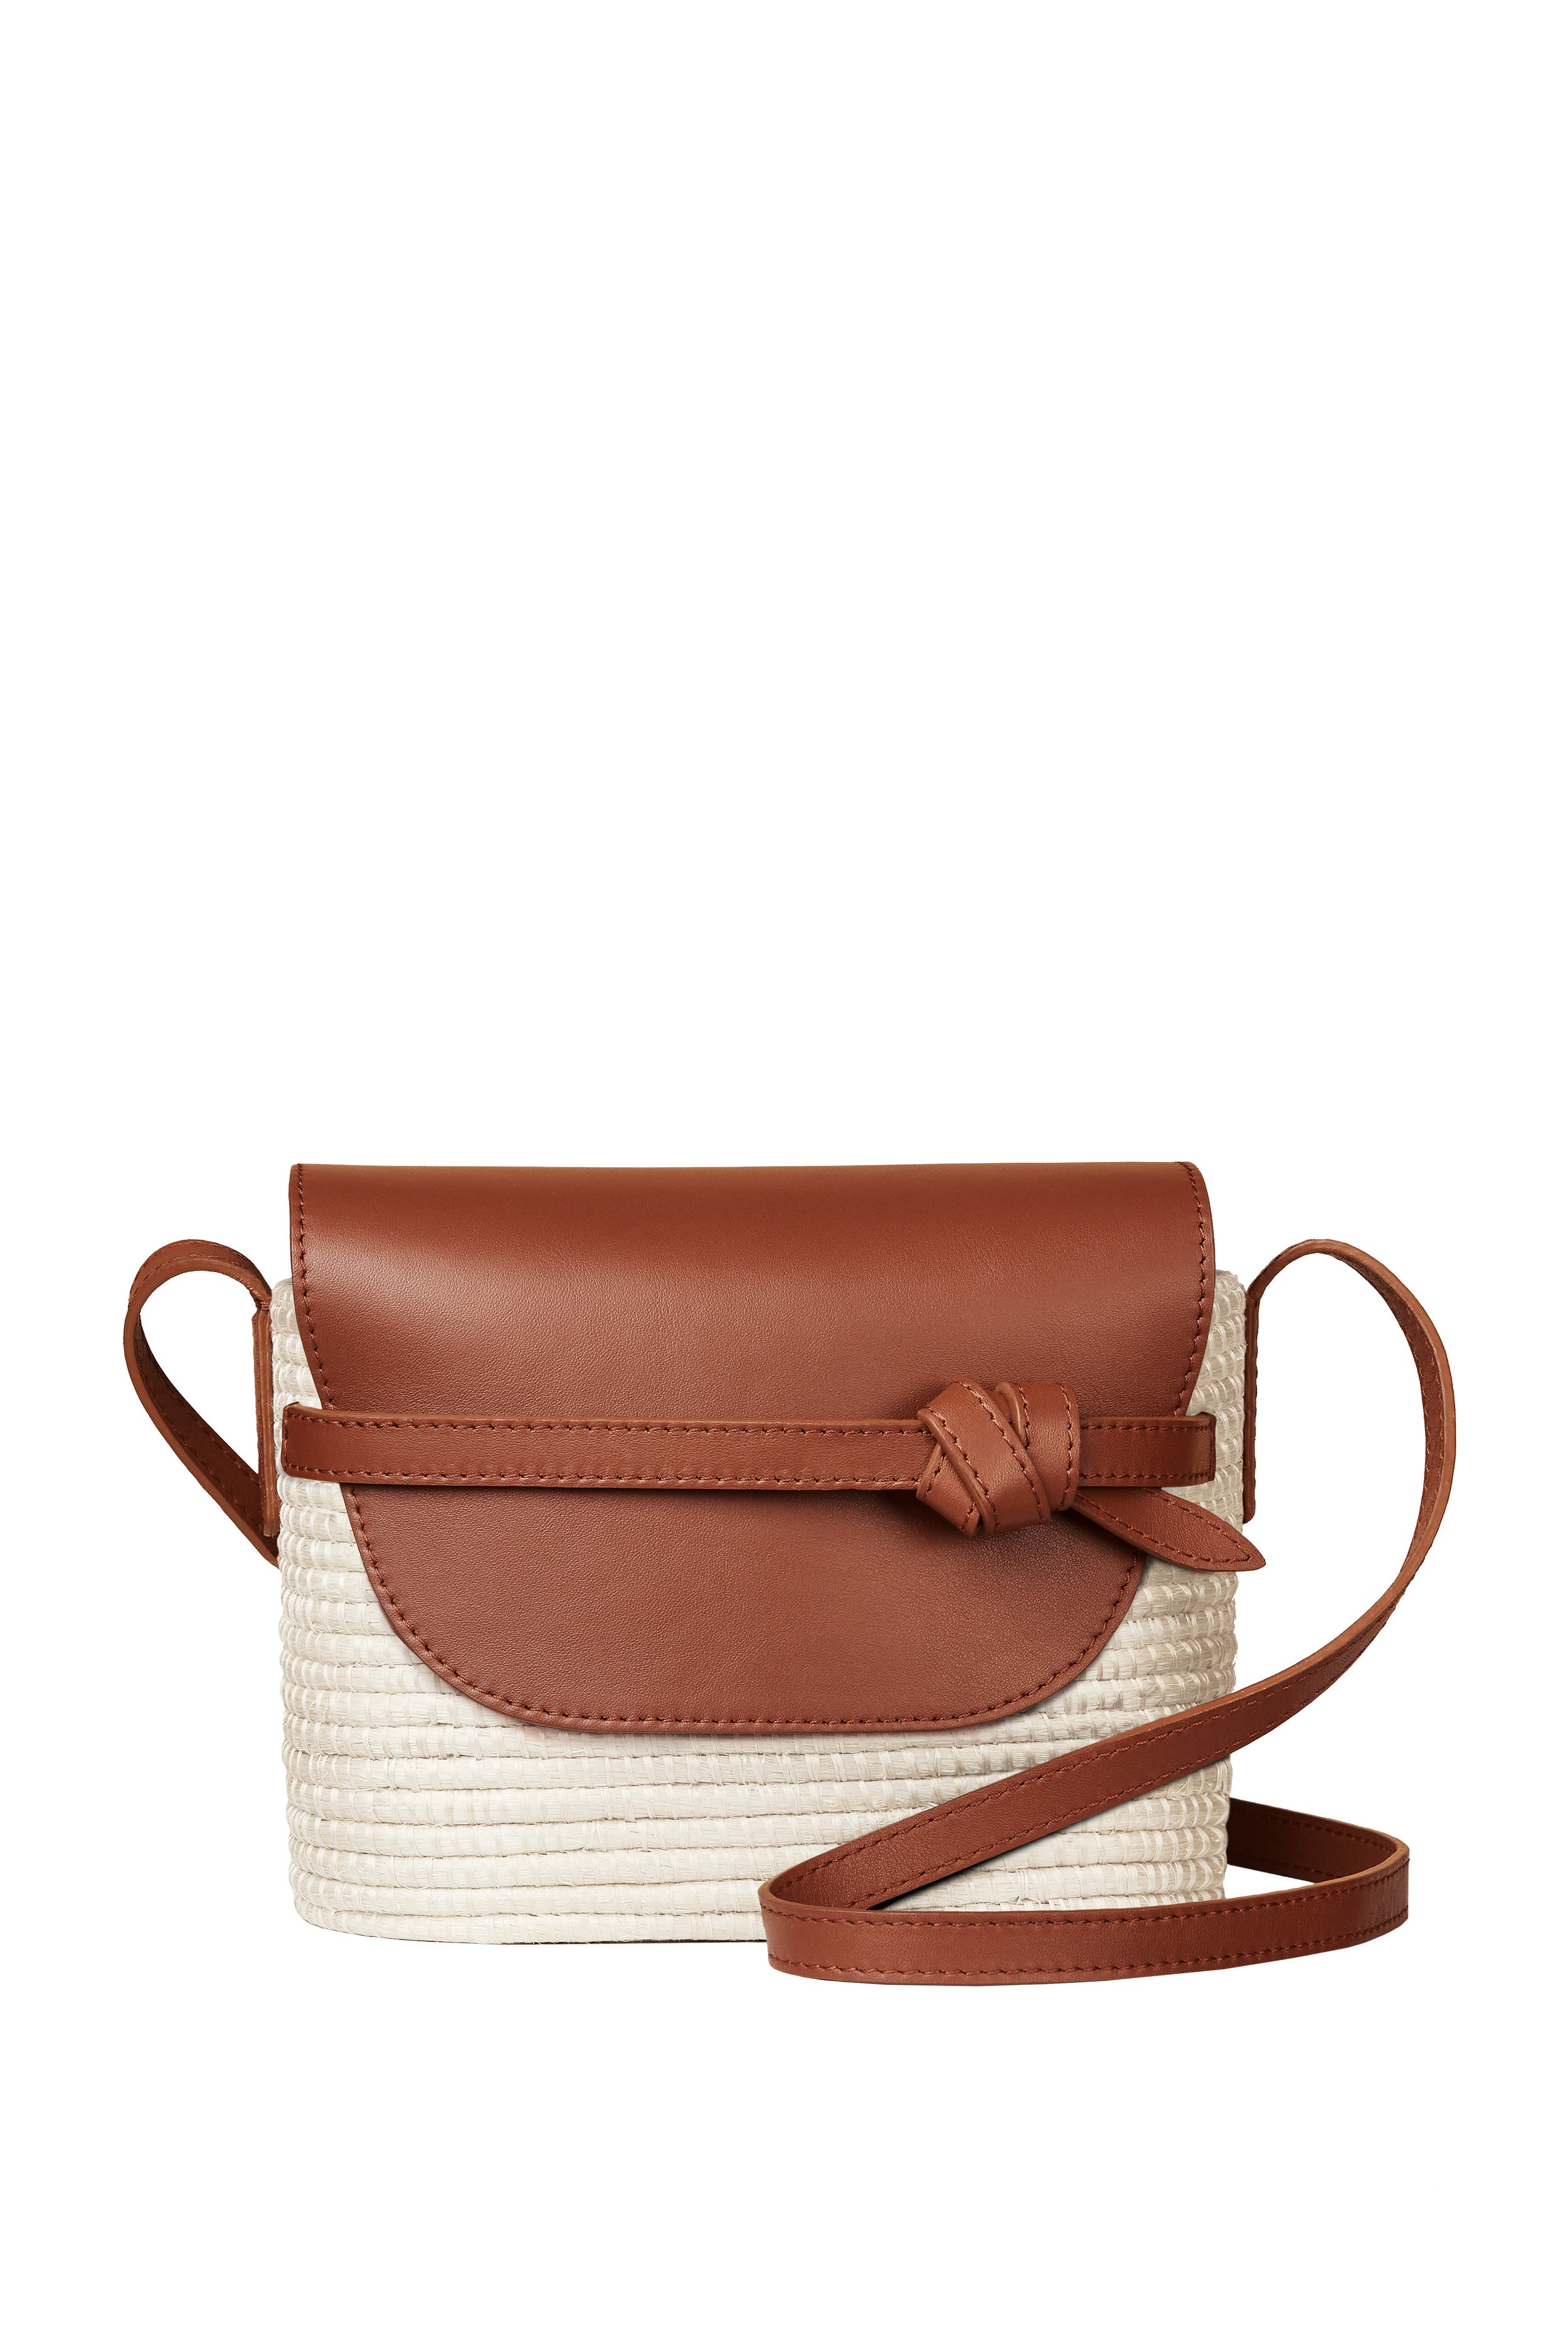 Clare V. Pot De Miel Leather-trimmed Woven Straw Tote in Natural